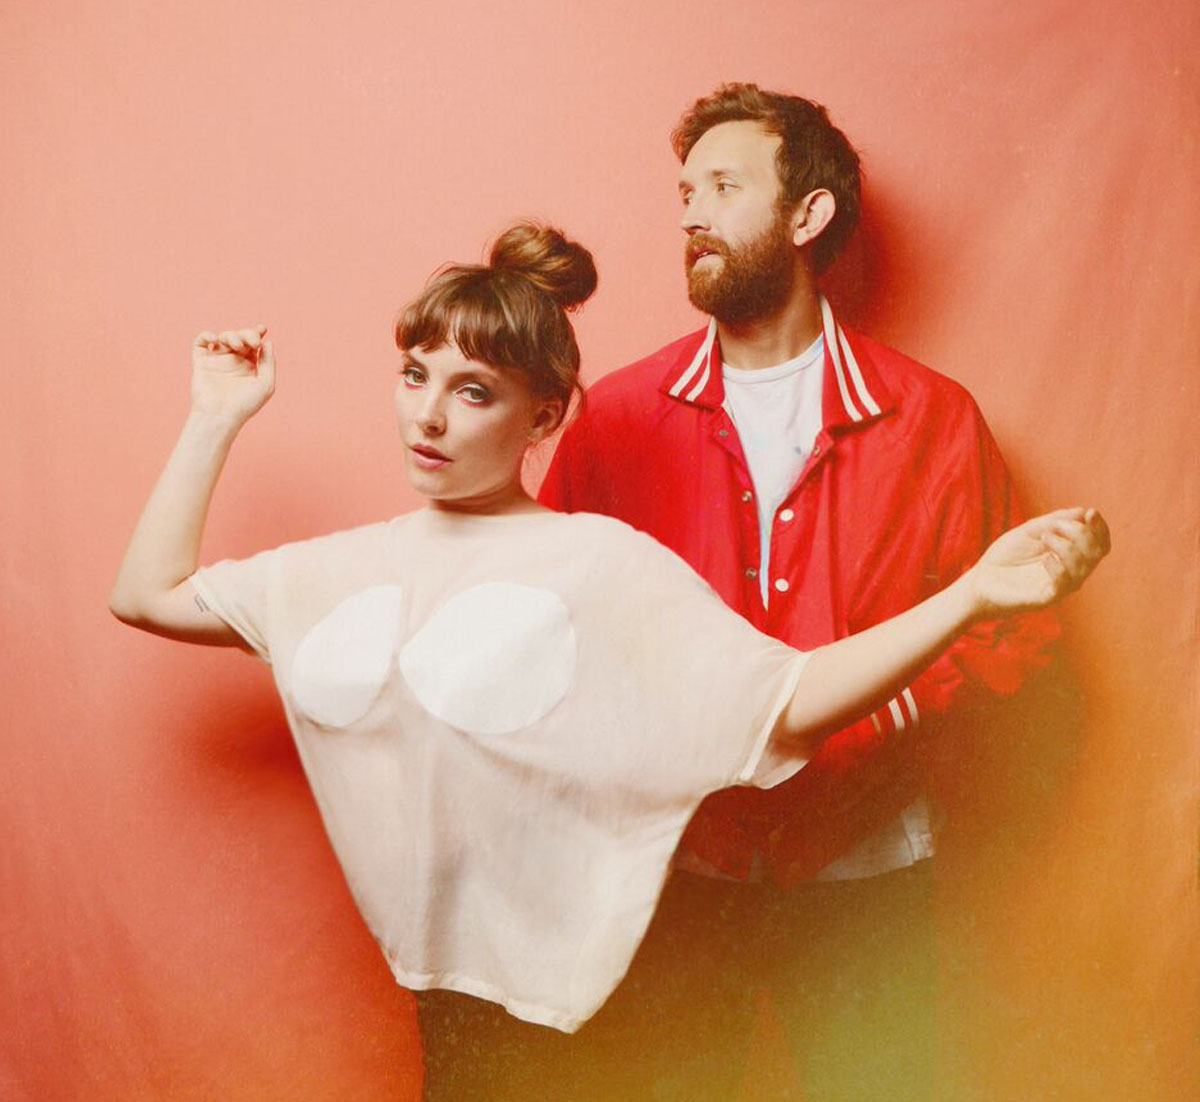 Sylvan Esso: Fountain Stage, 3.15 - 4.00pm Their sophomore album What Now (2017) is the sound of a band truly fulfilling the potential and promise of their debut album. Everything has evolved - the production is bolder, the vocals are more intense, the melodies are brighter, and the songs are that much more expansively open and cohesive. Find out more.